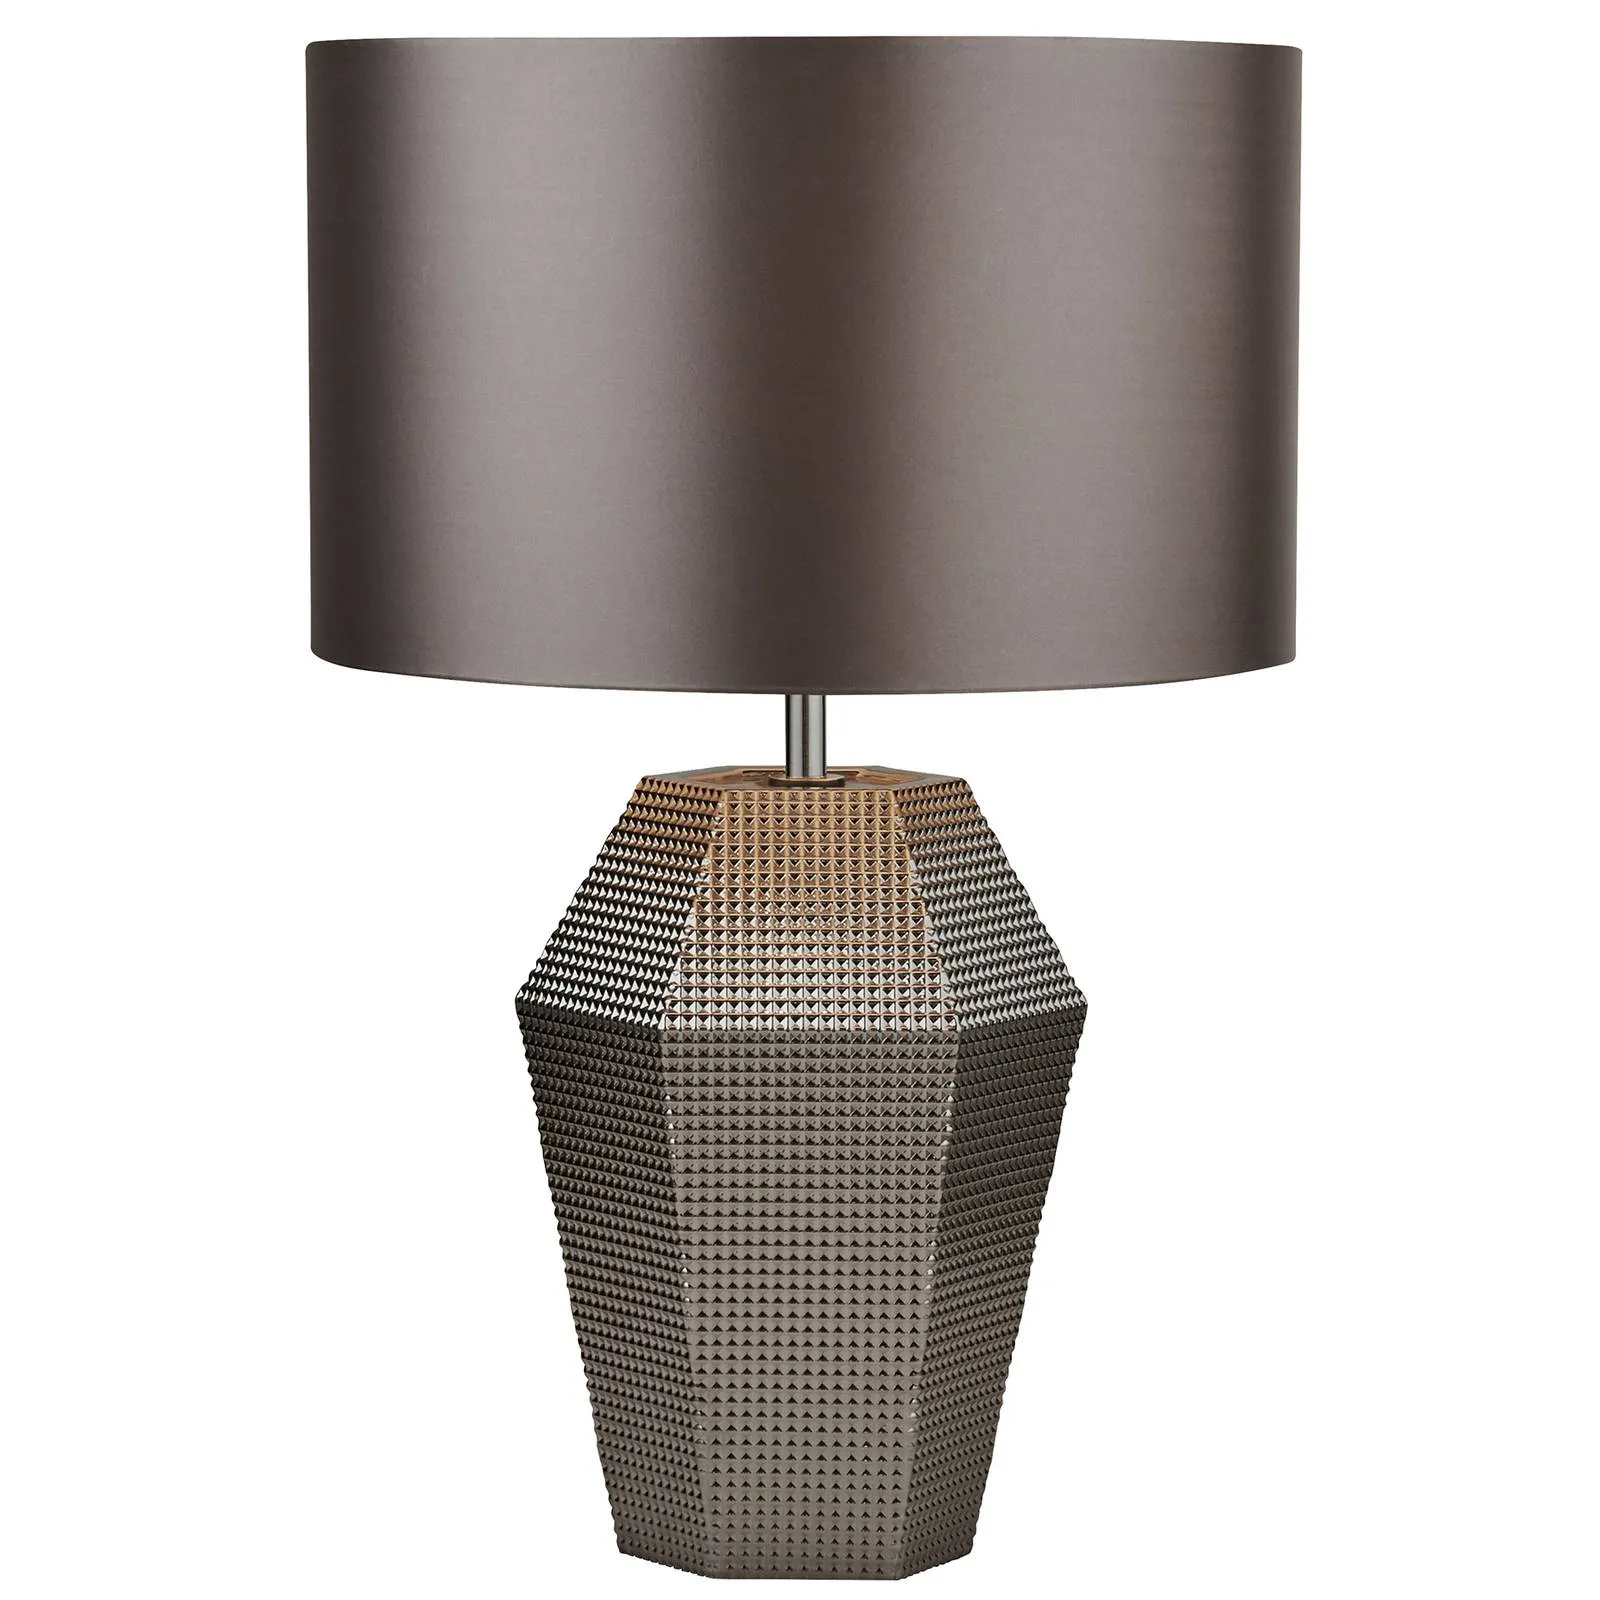 Polygon table lamp with a glass base